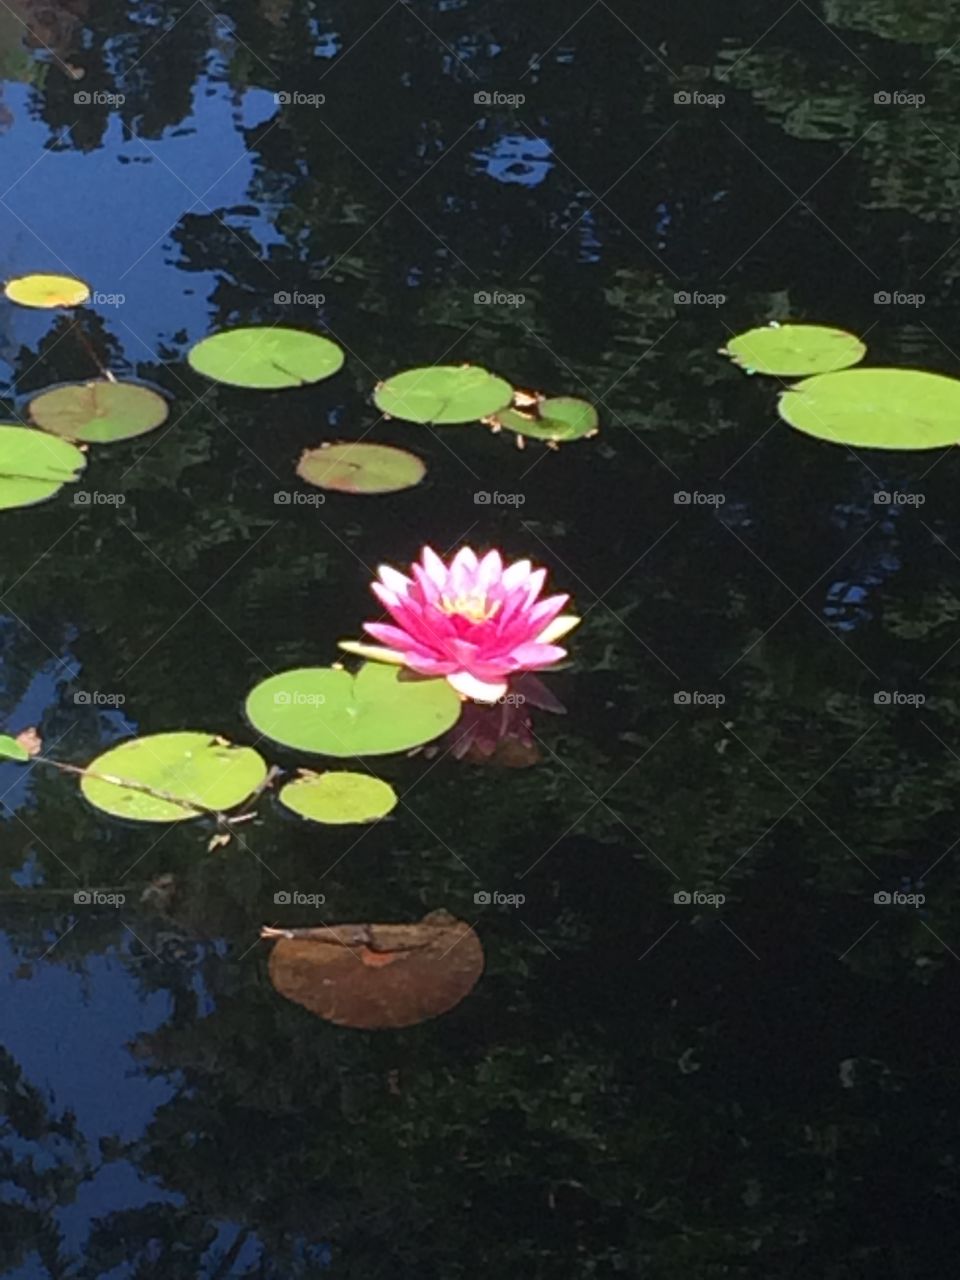 Lily pads and a lotus flower on a still and peaceful pond 